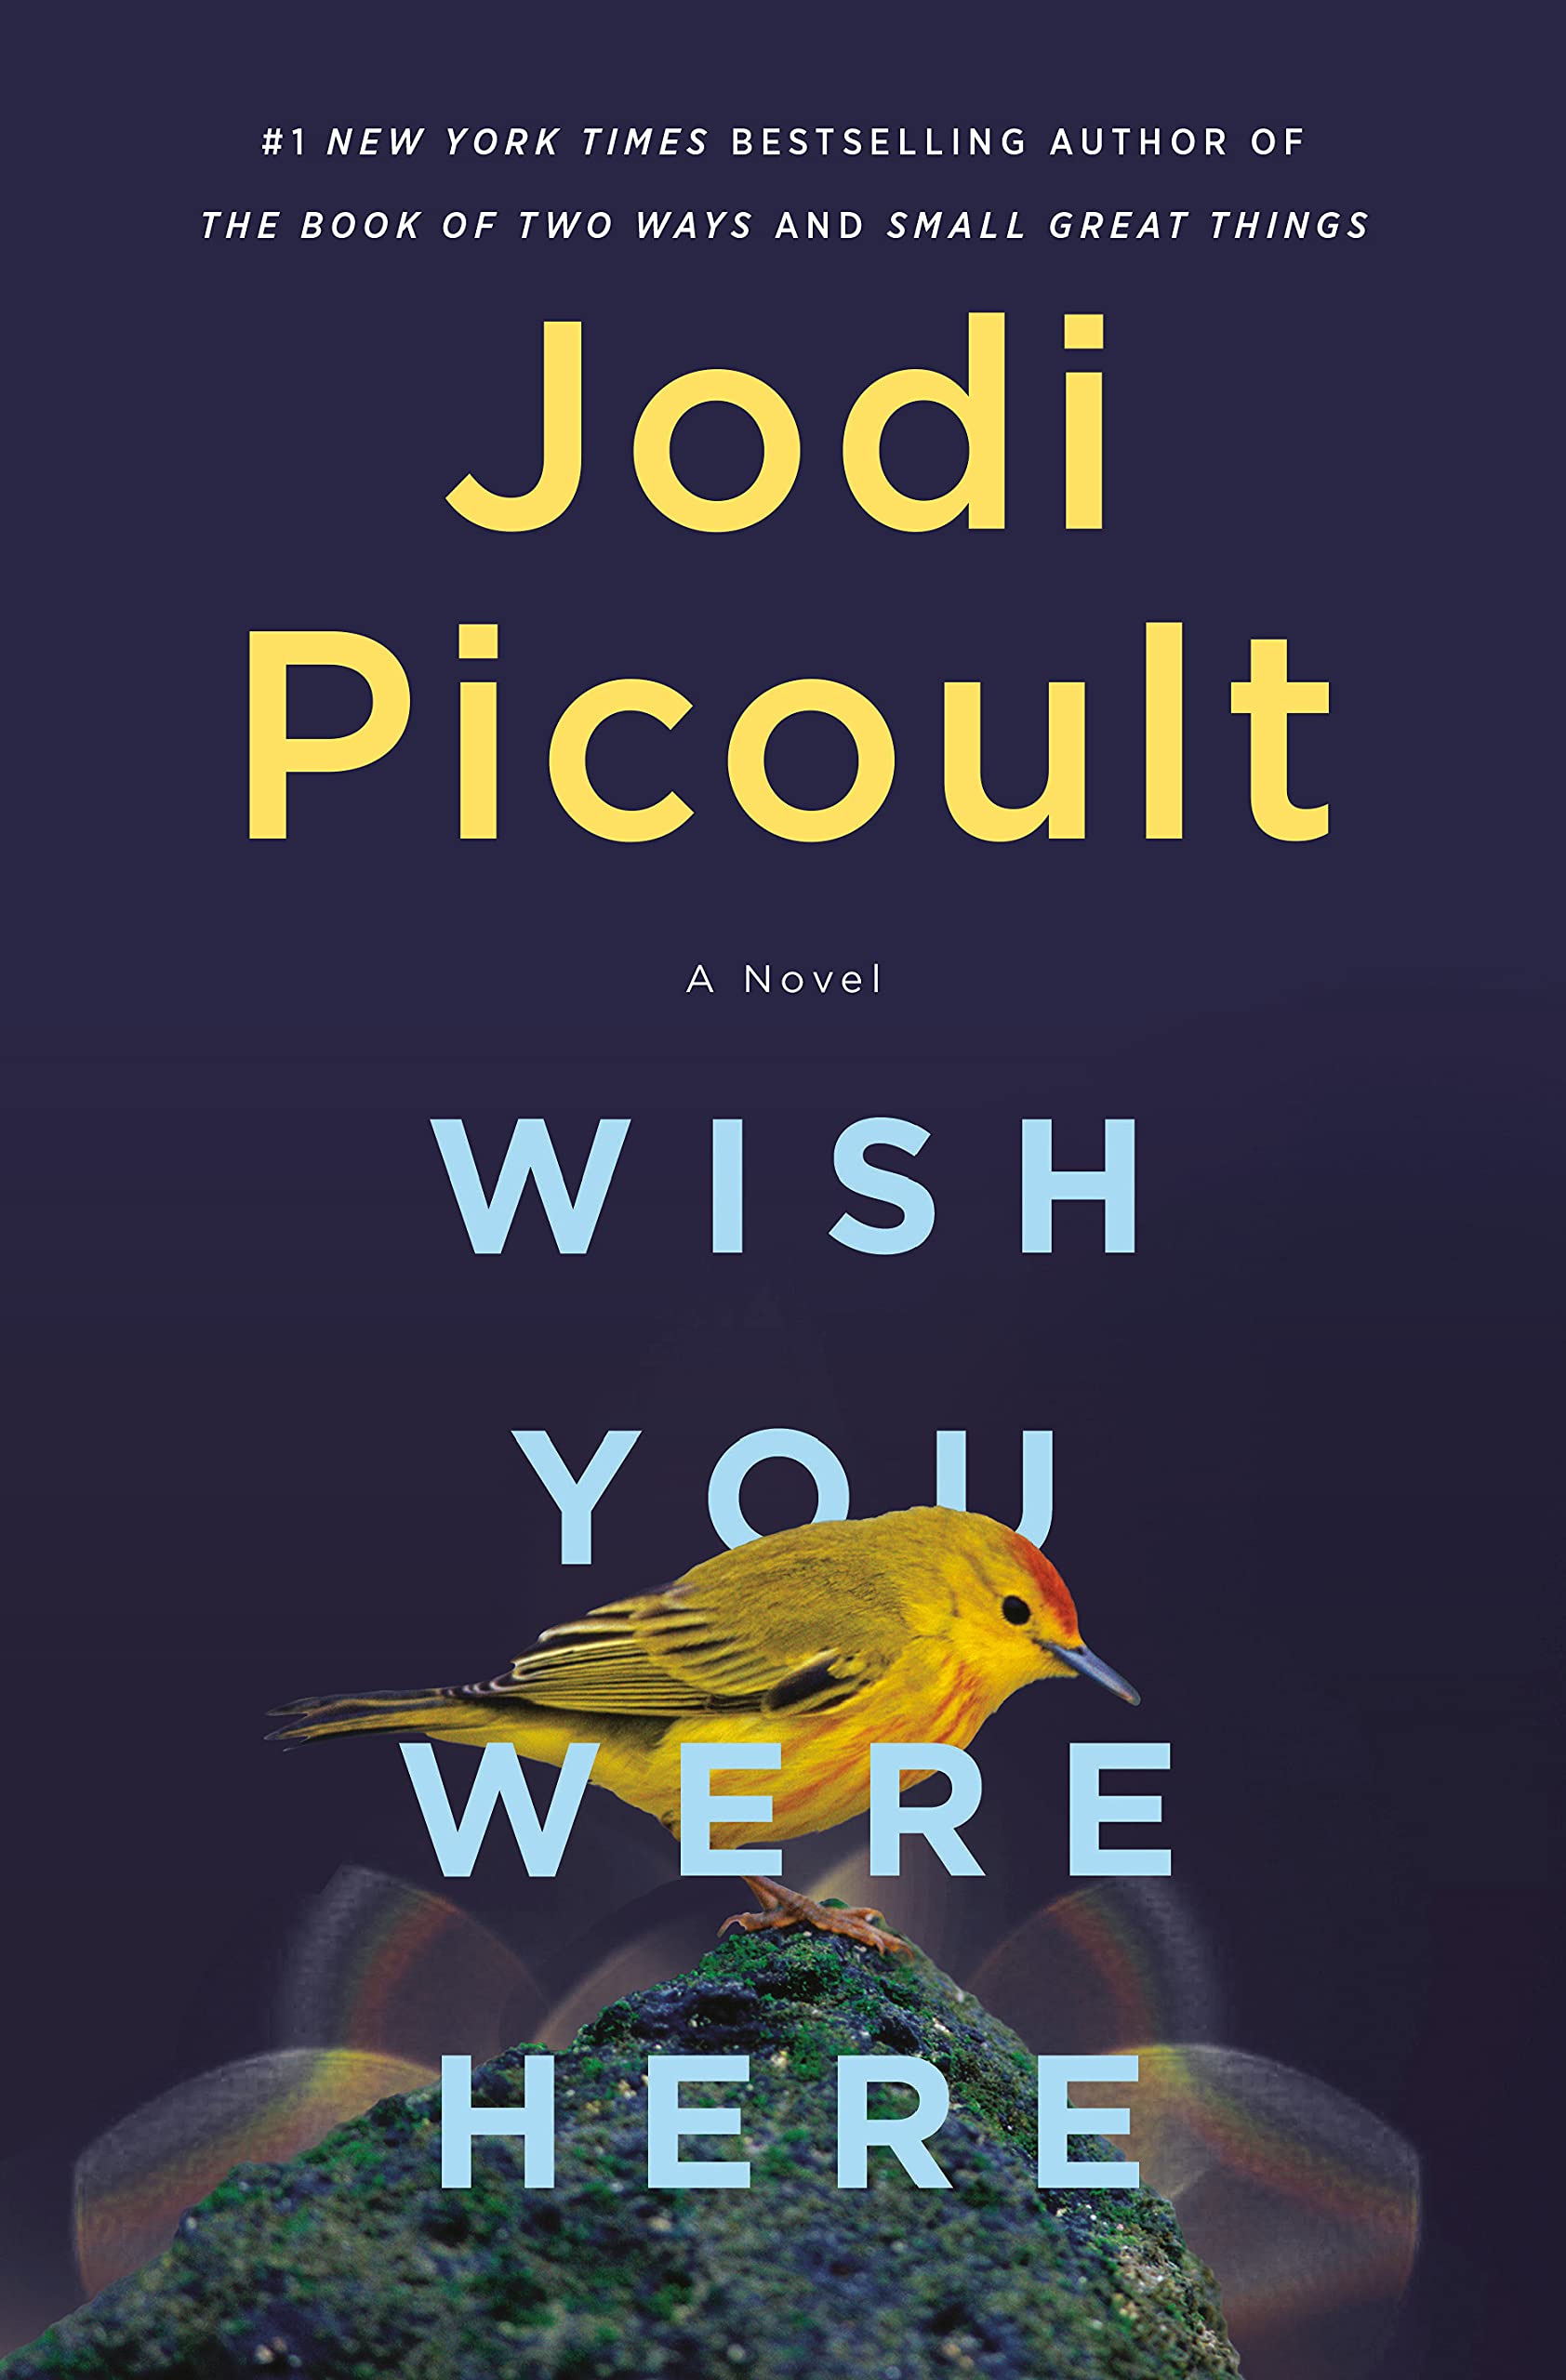 Wish You Were Here: A Novel Hardcover by Jodi Picoult